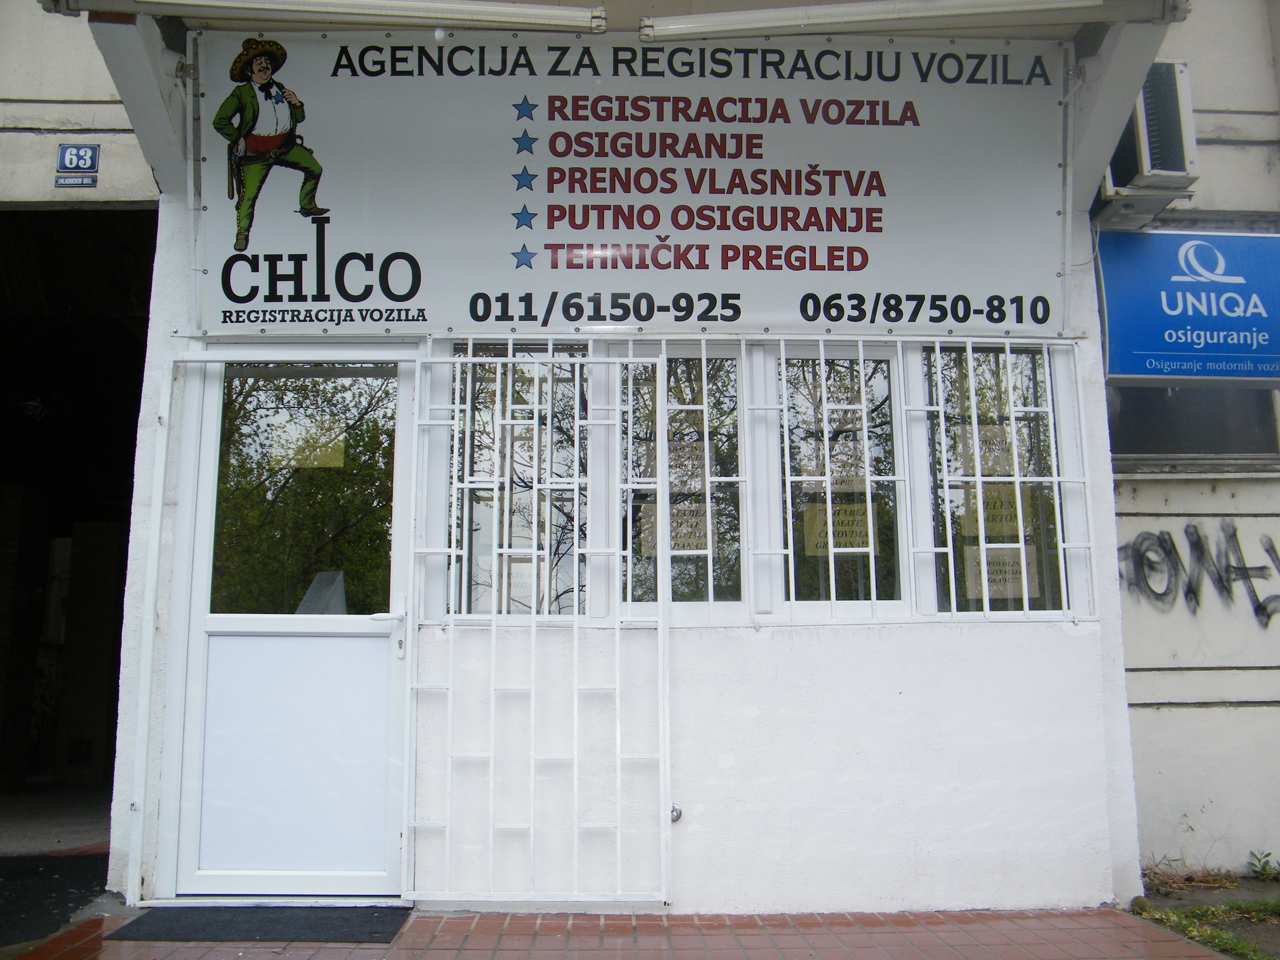 AGENCY CHICO - REGISTRATION OF VEHICLES END TECHNICAL INSPECTION Vehicle Testing Beograd